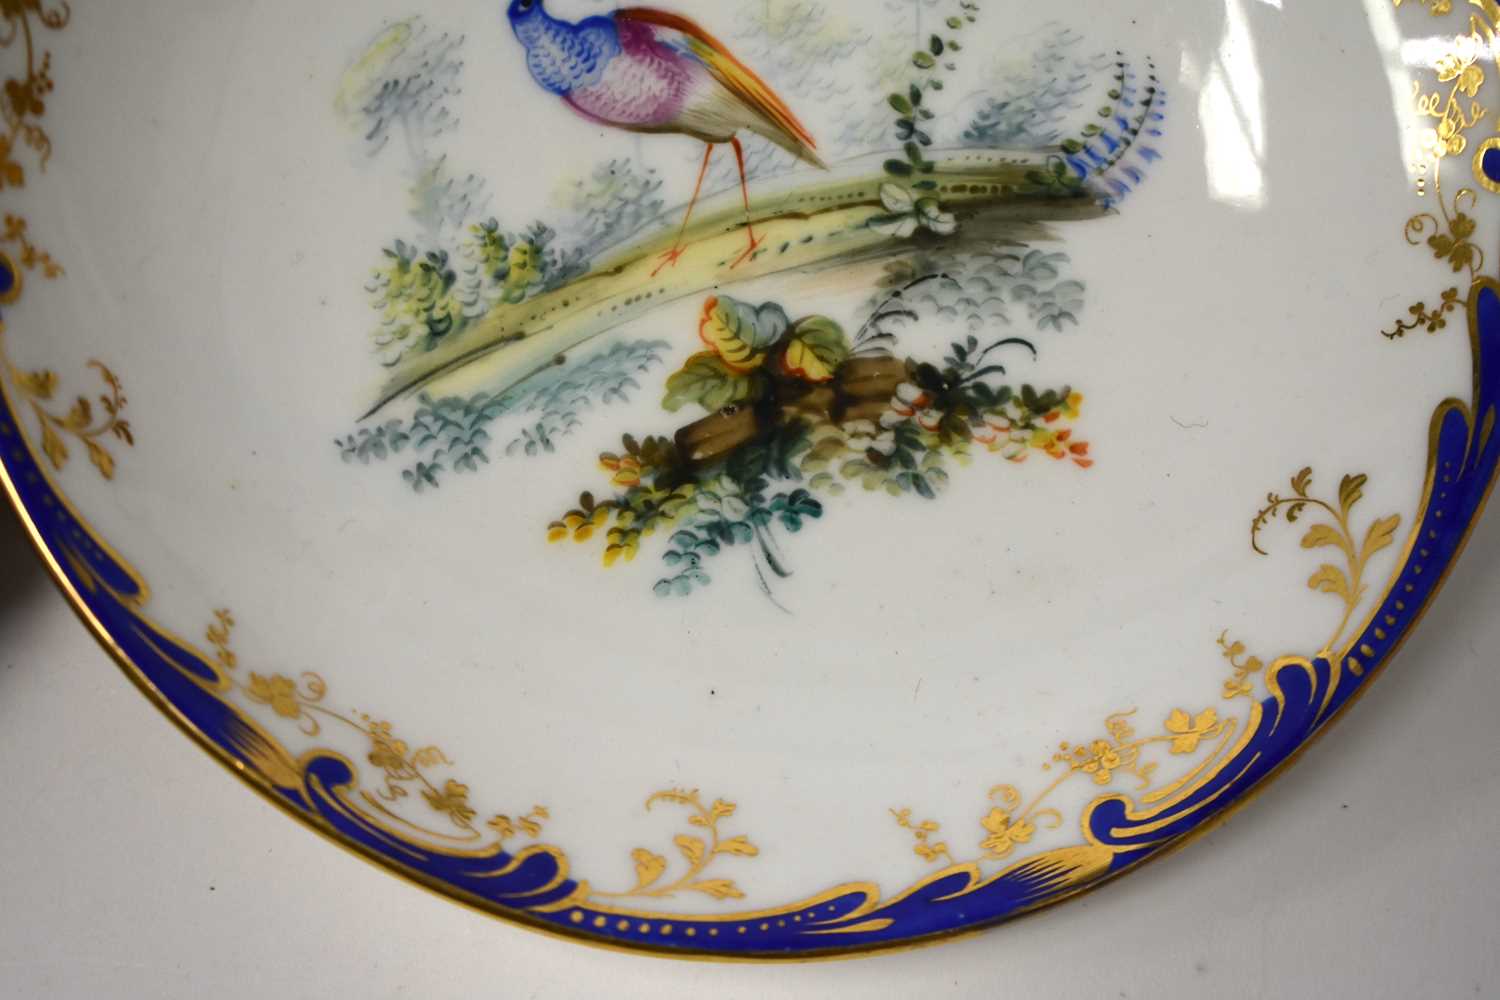 THREE 19TH CENTURY COALPORT SPARKS WORCESTER PORCELAIN CUPS AND SAUCERS painted with landscapes - Image 15 of 39